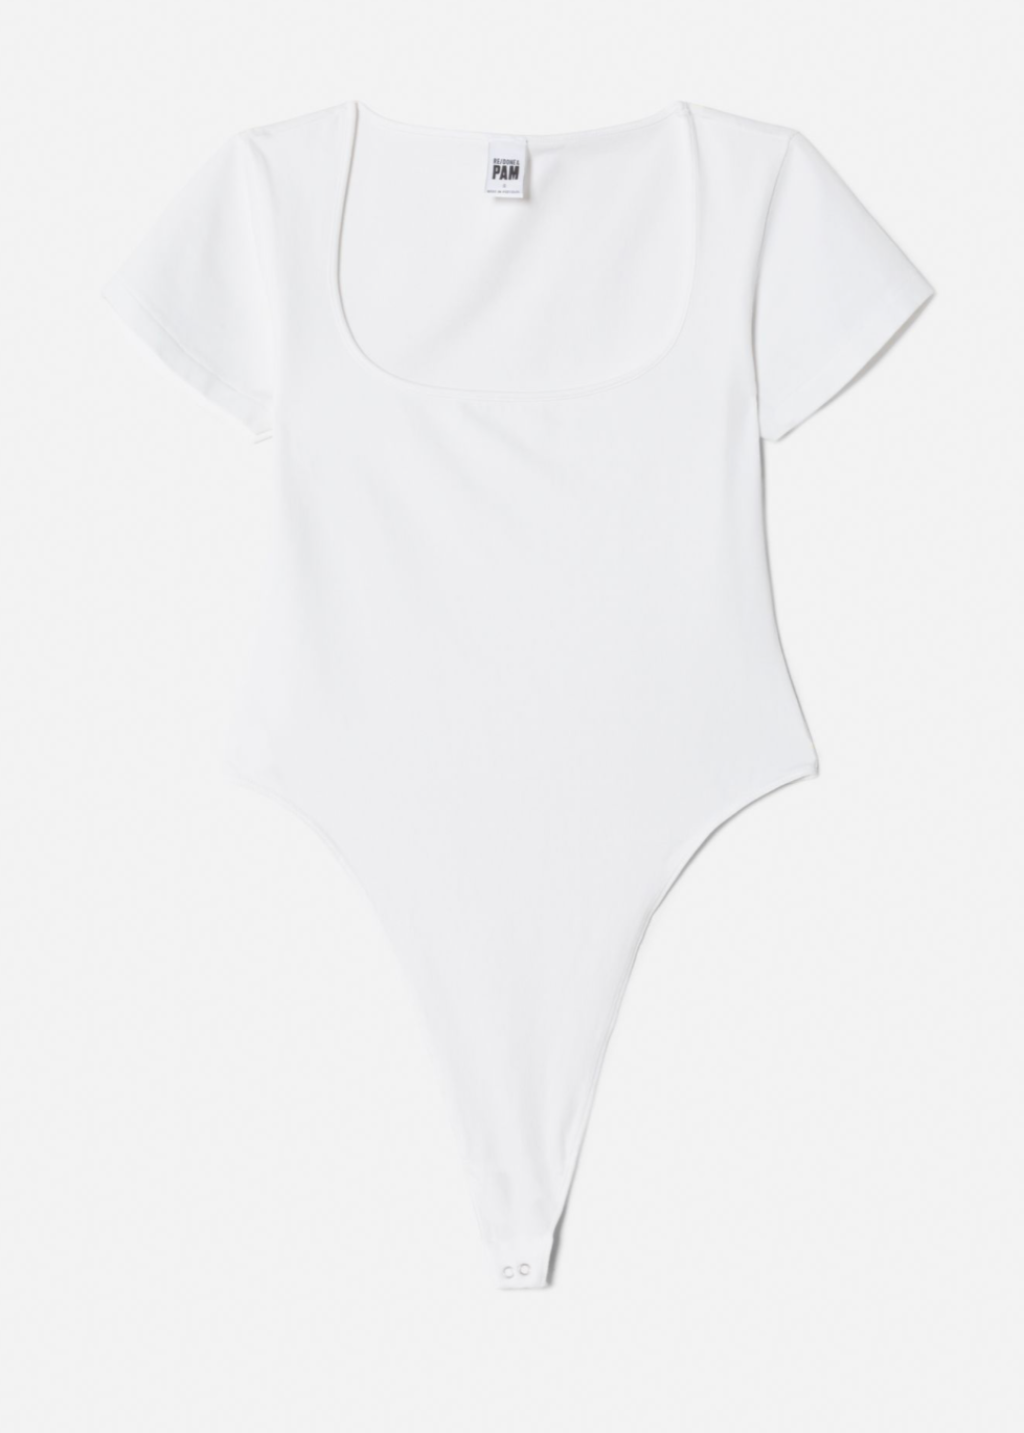 I finally found the perfect bodysuit from  @can